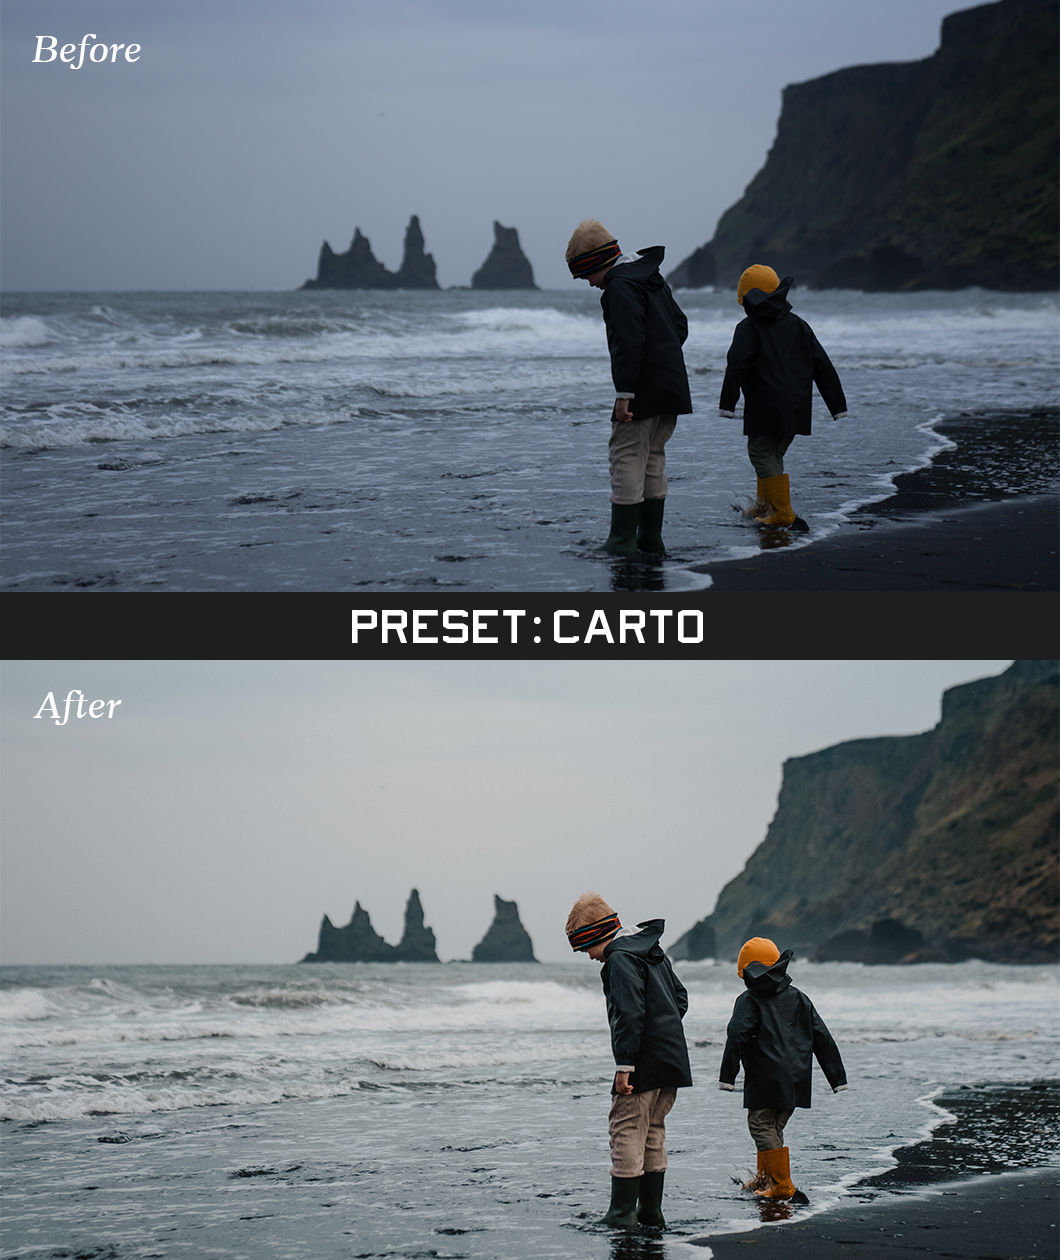 Two of the same photo of 2 children on a beach. The one on top says "Before"and is darker. The one on bottom says "After" and is clearer quality. In between the photos is a bar that says "Preset: Carto" - by Iz & Johnny Harris